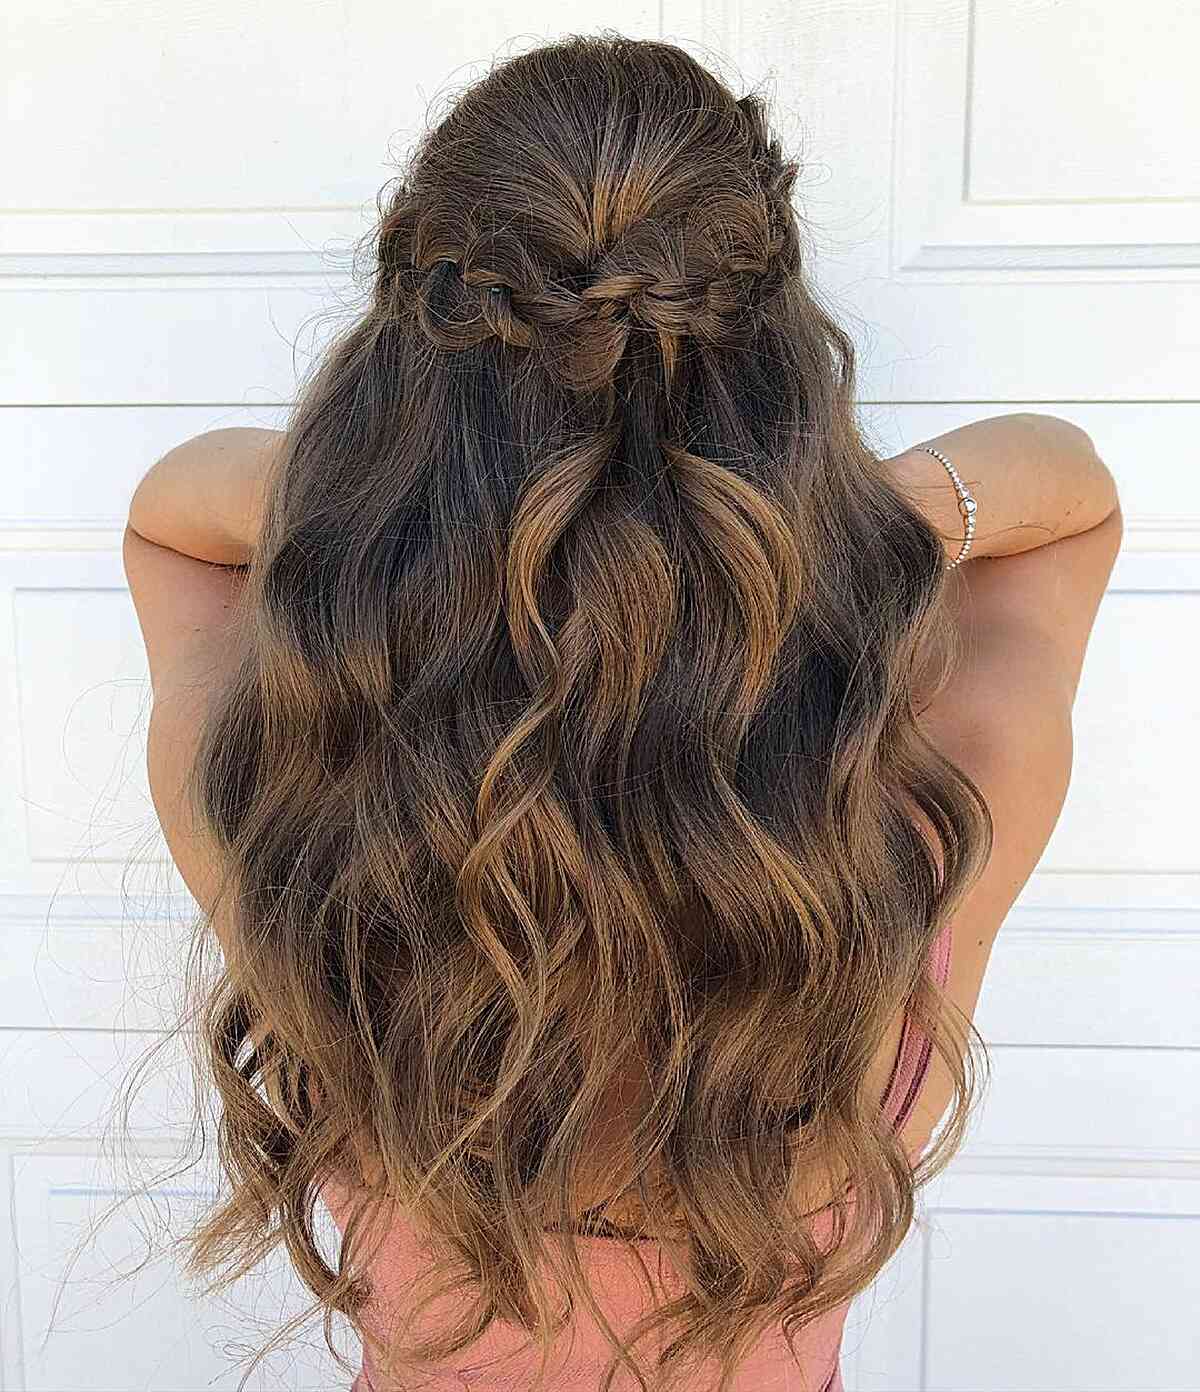 long braided half up with beach waves for graduation events